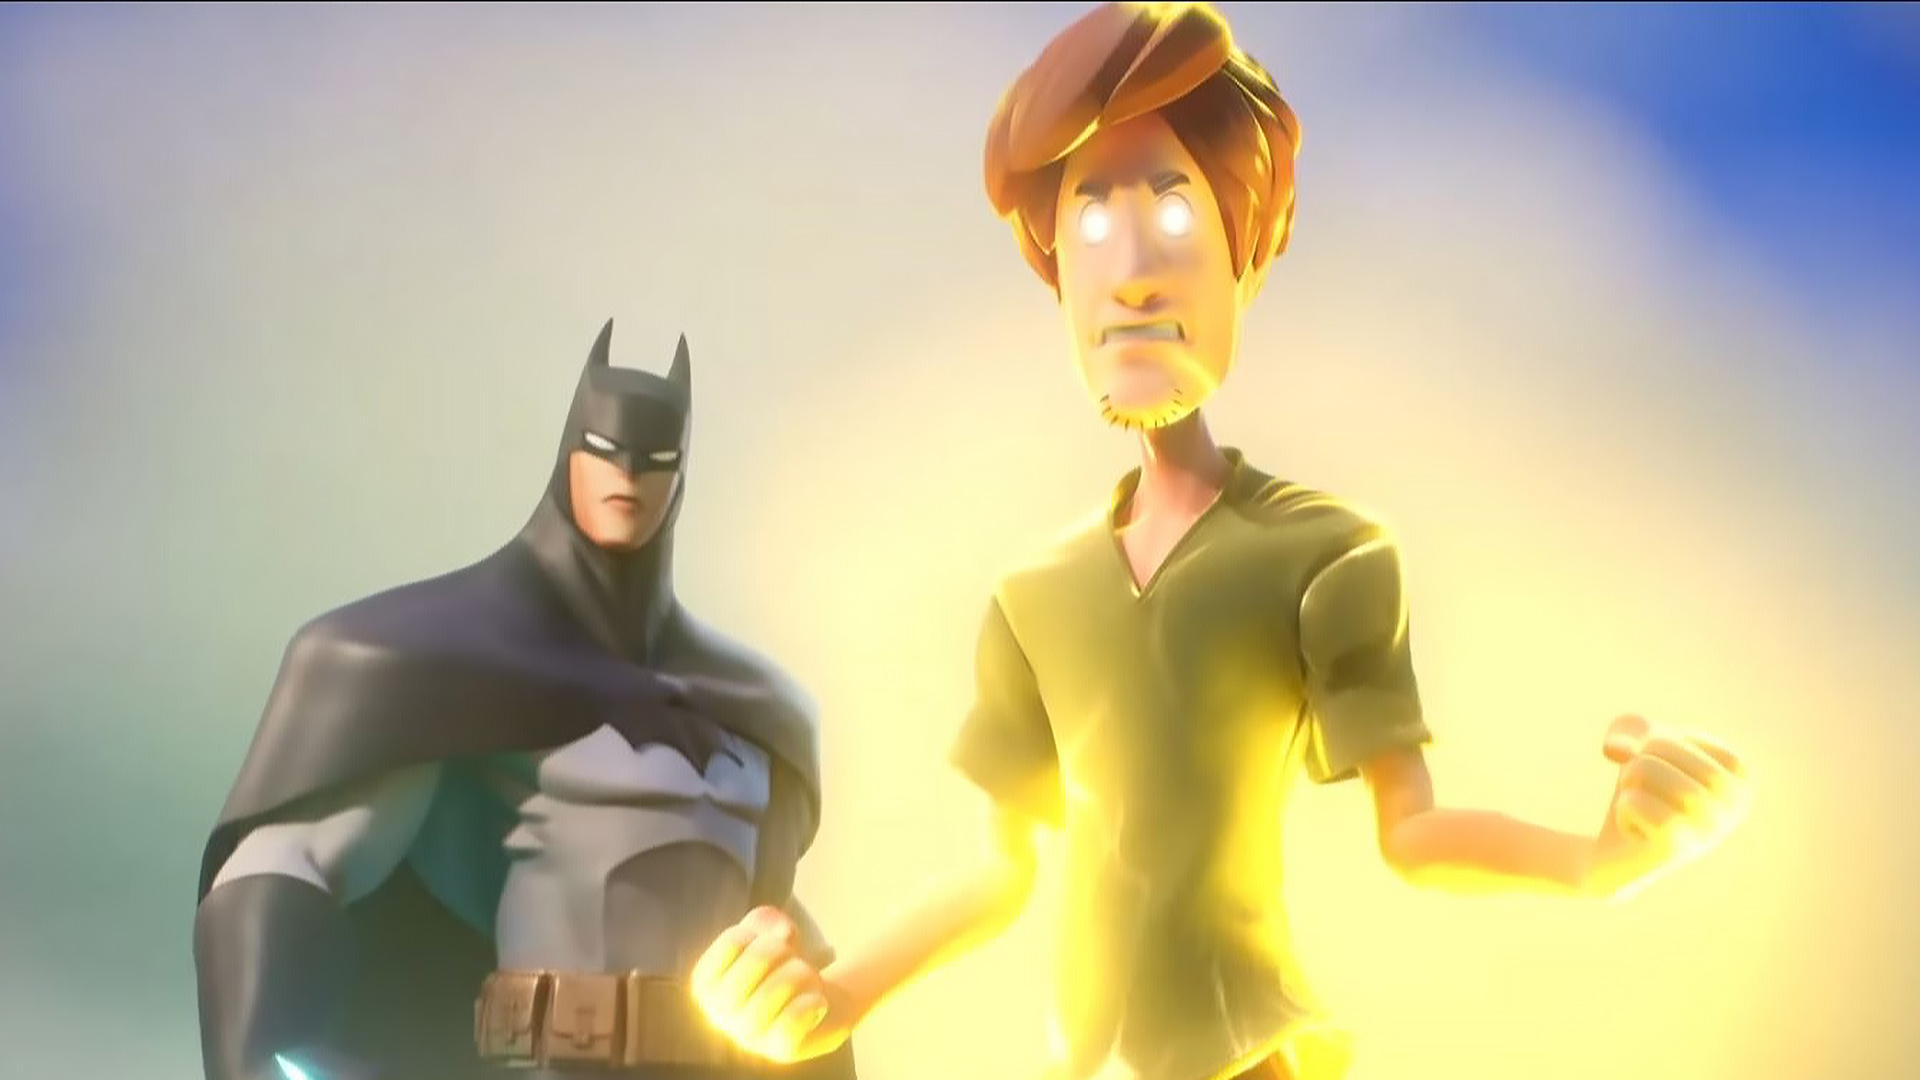 Batman and Ultra Instinct Shaggy standing next to each other